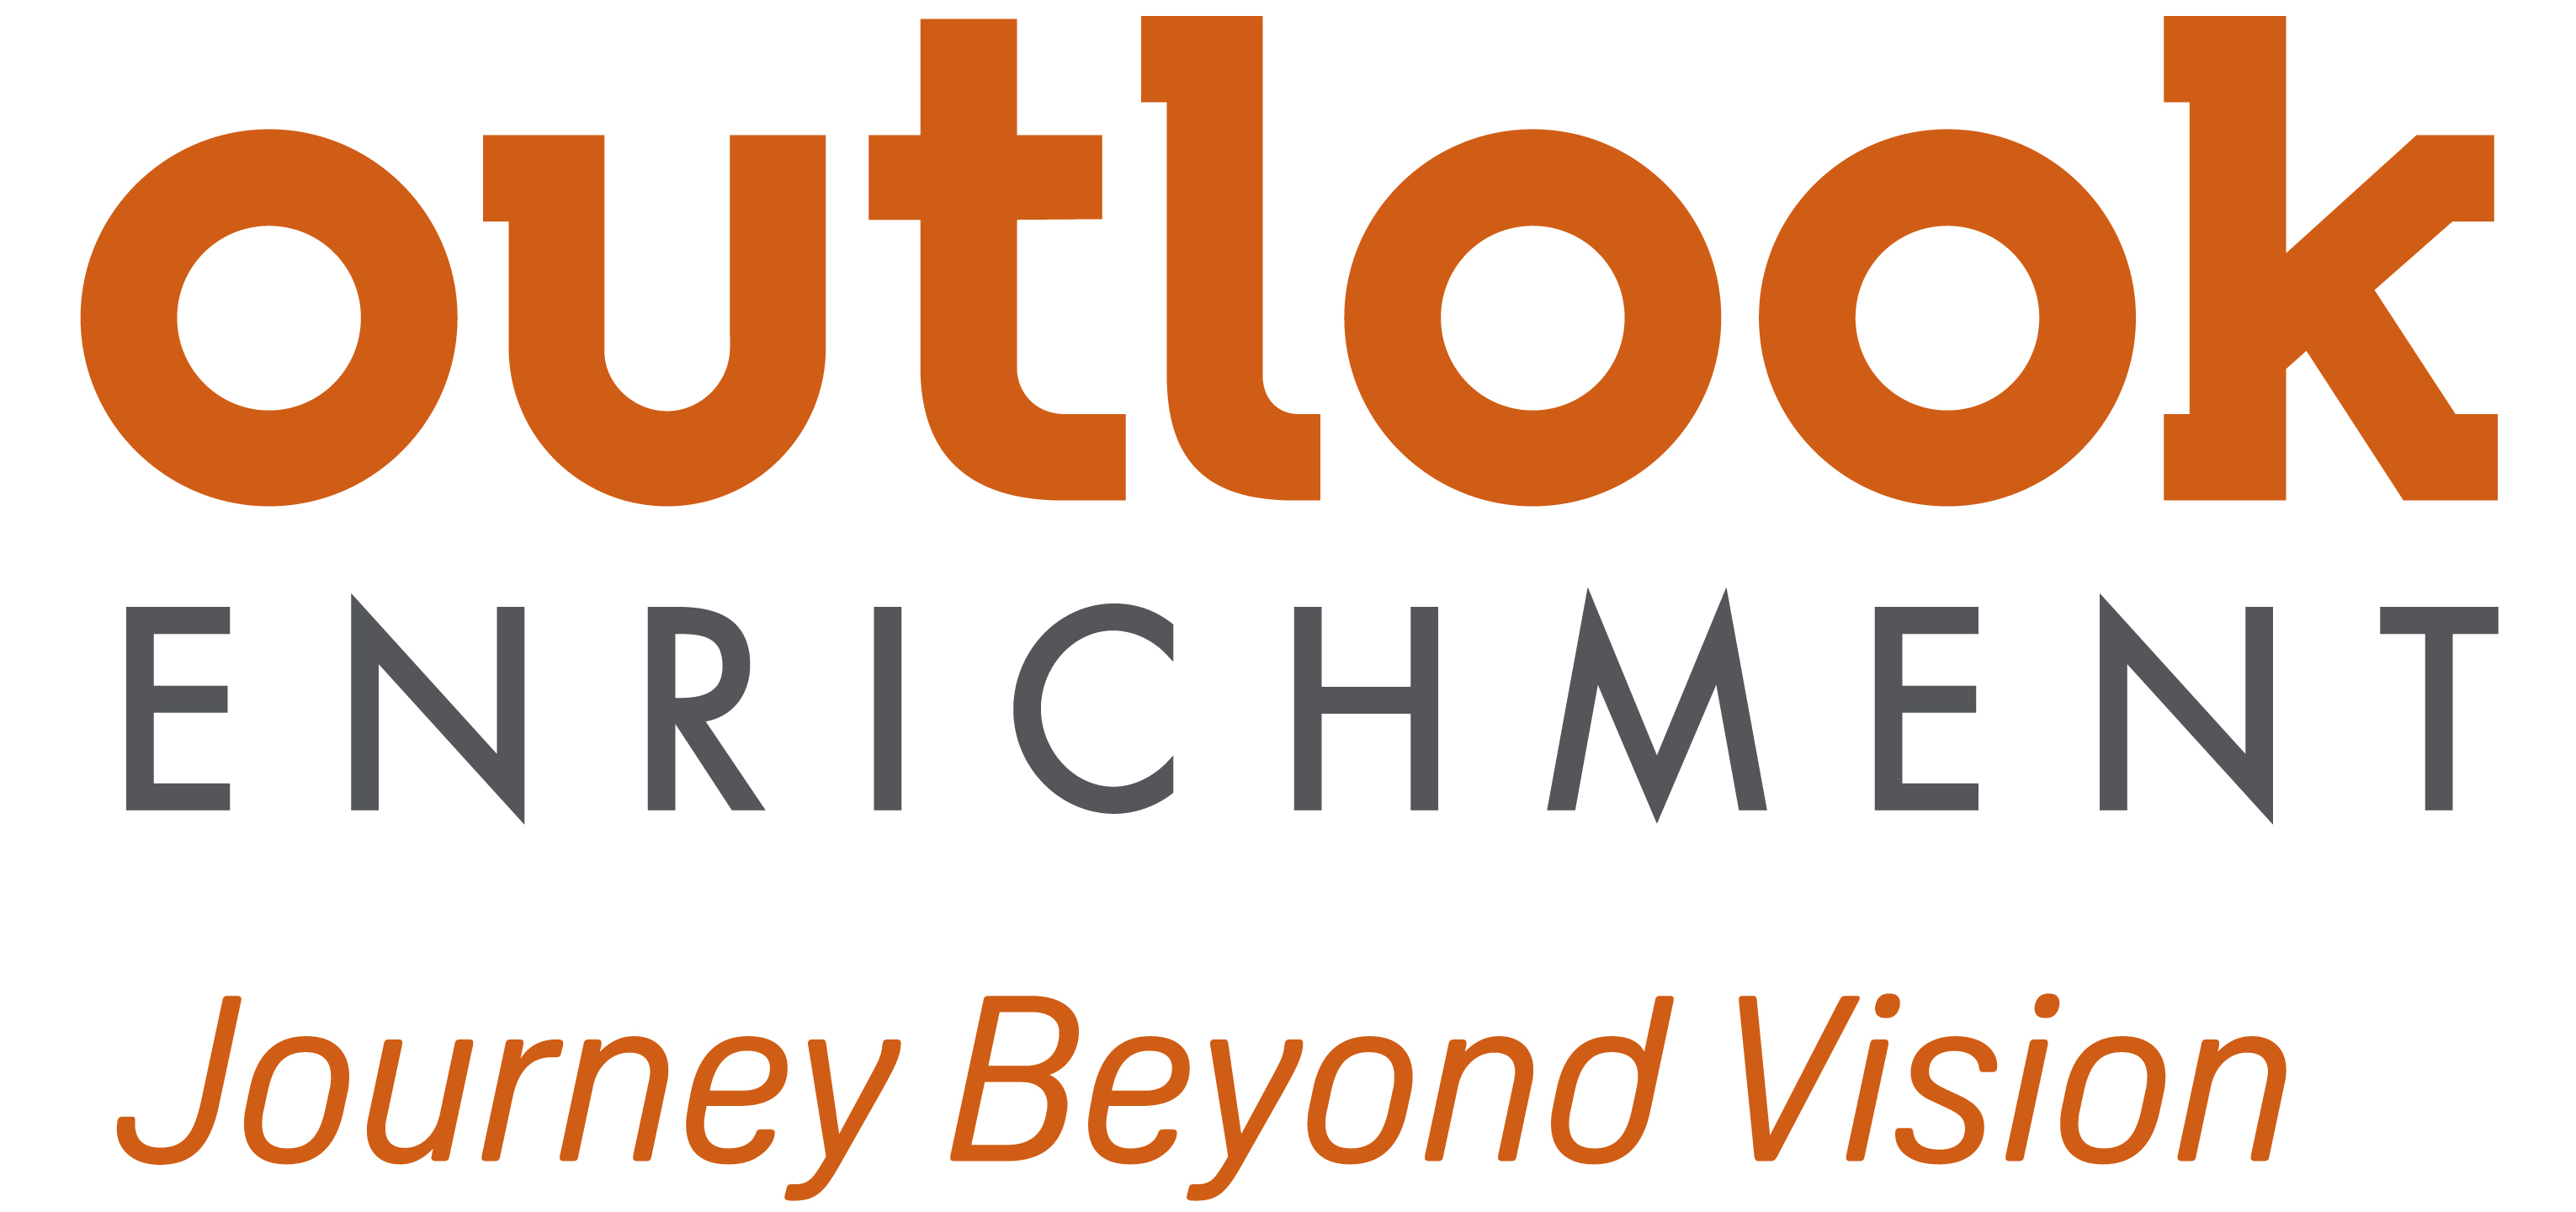 Outlook Enrichment Logo and tag line